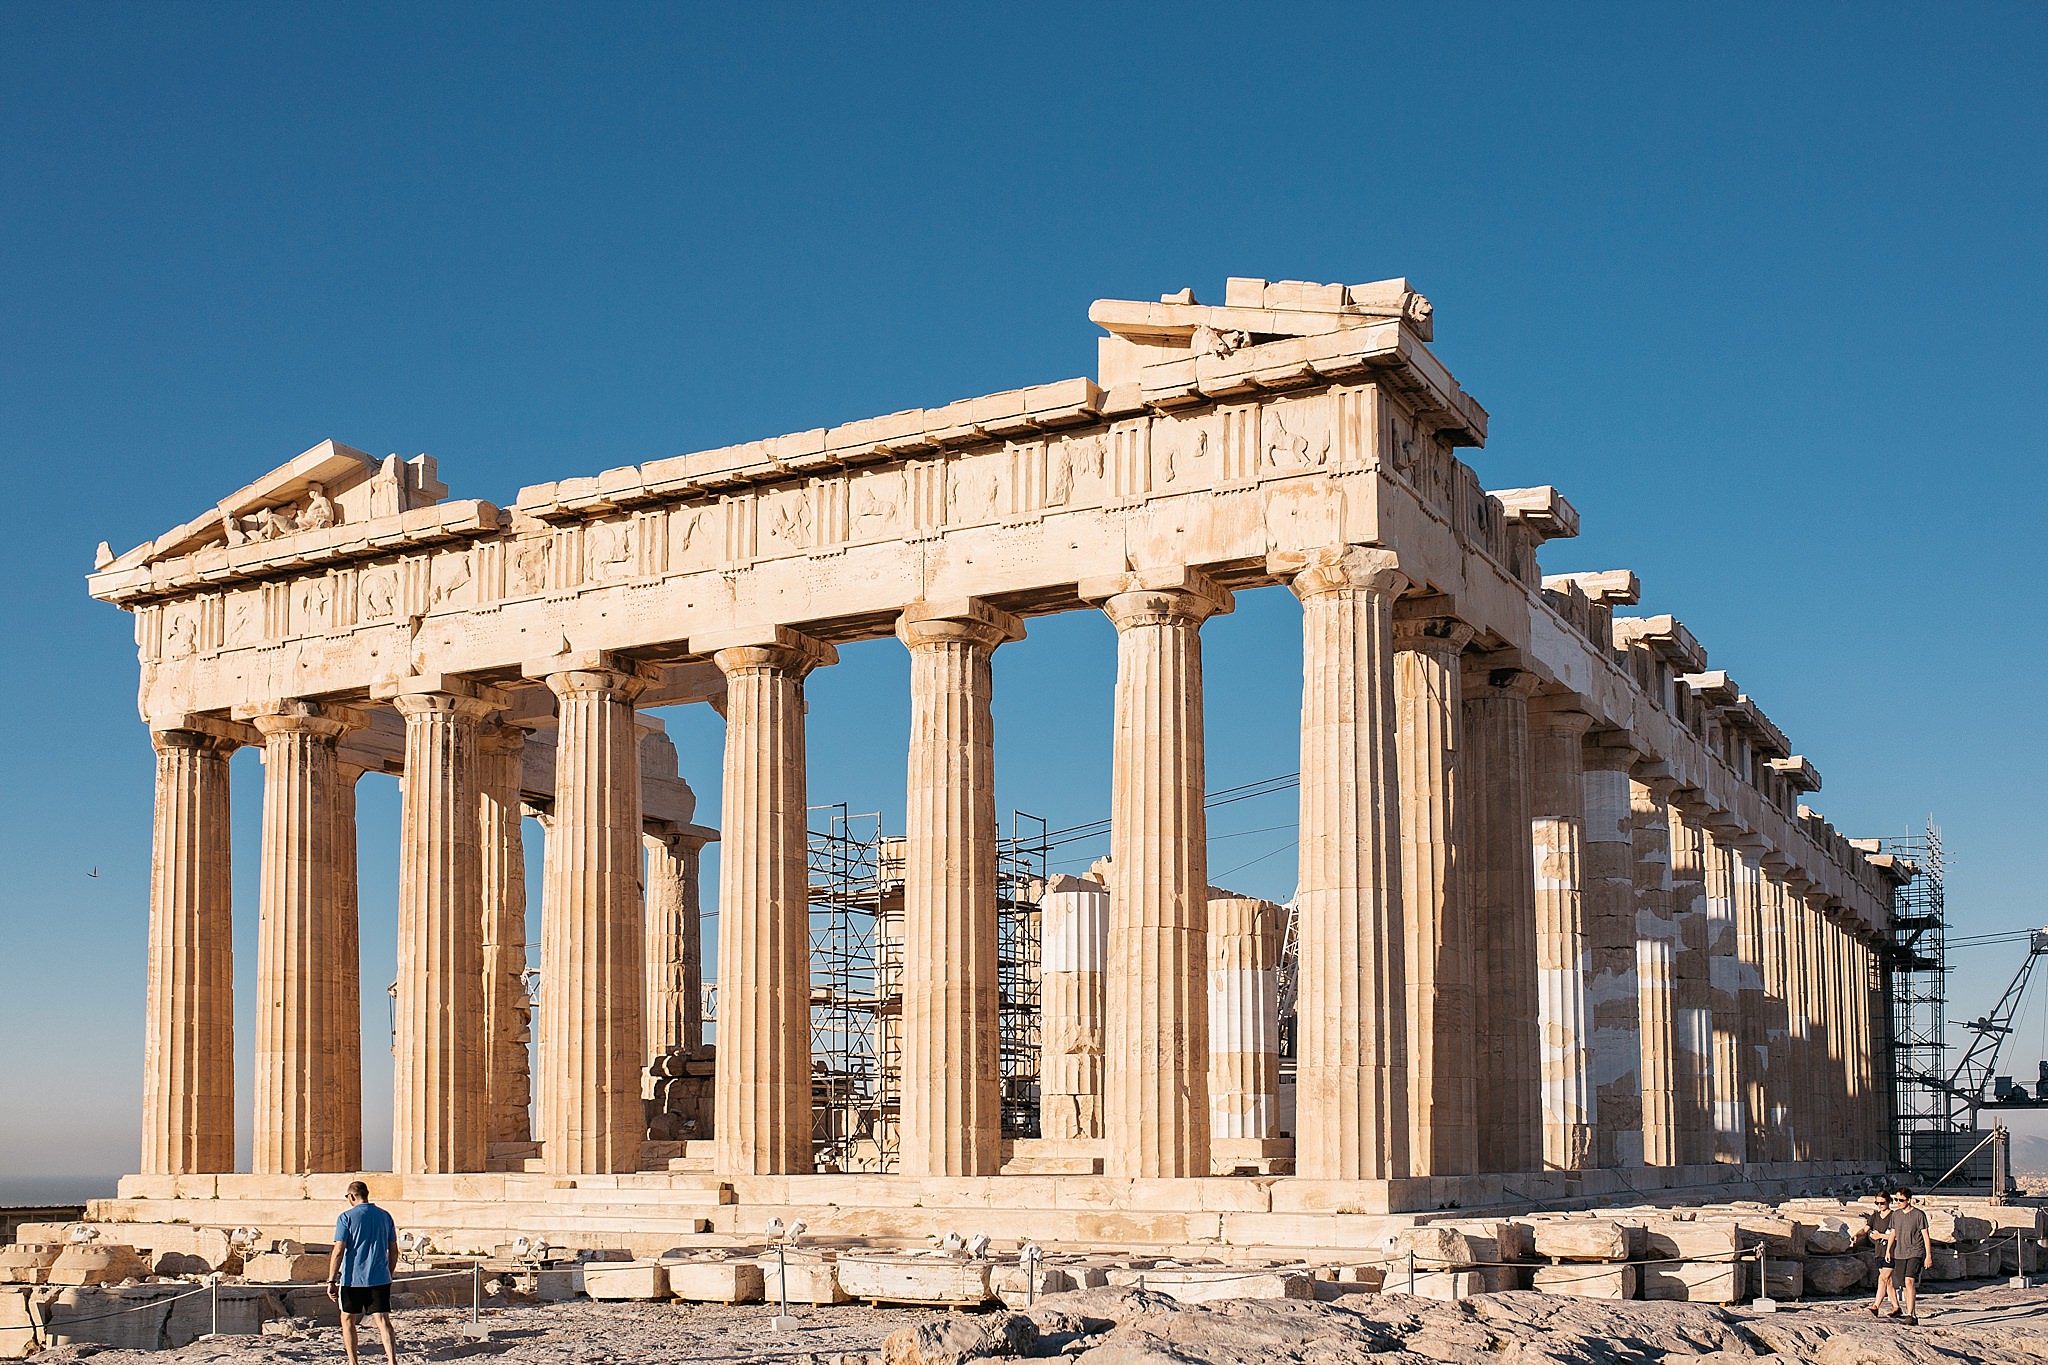   The Parthenon, such a beauty!  